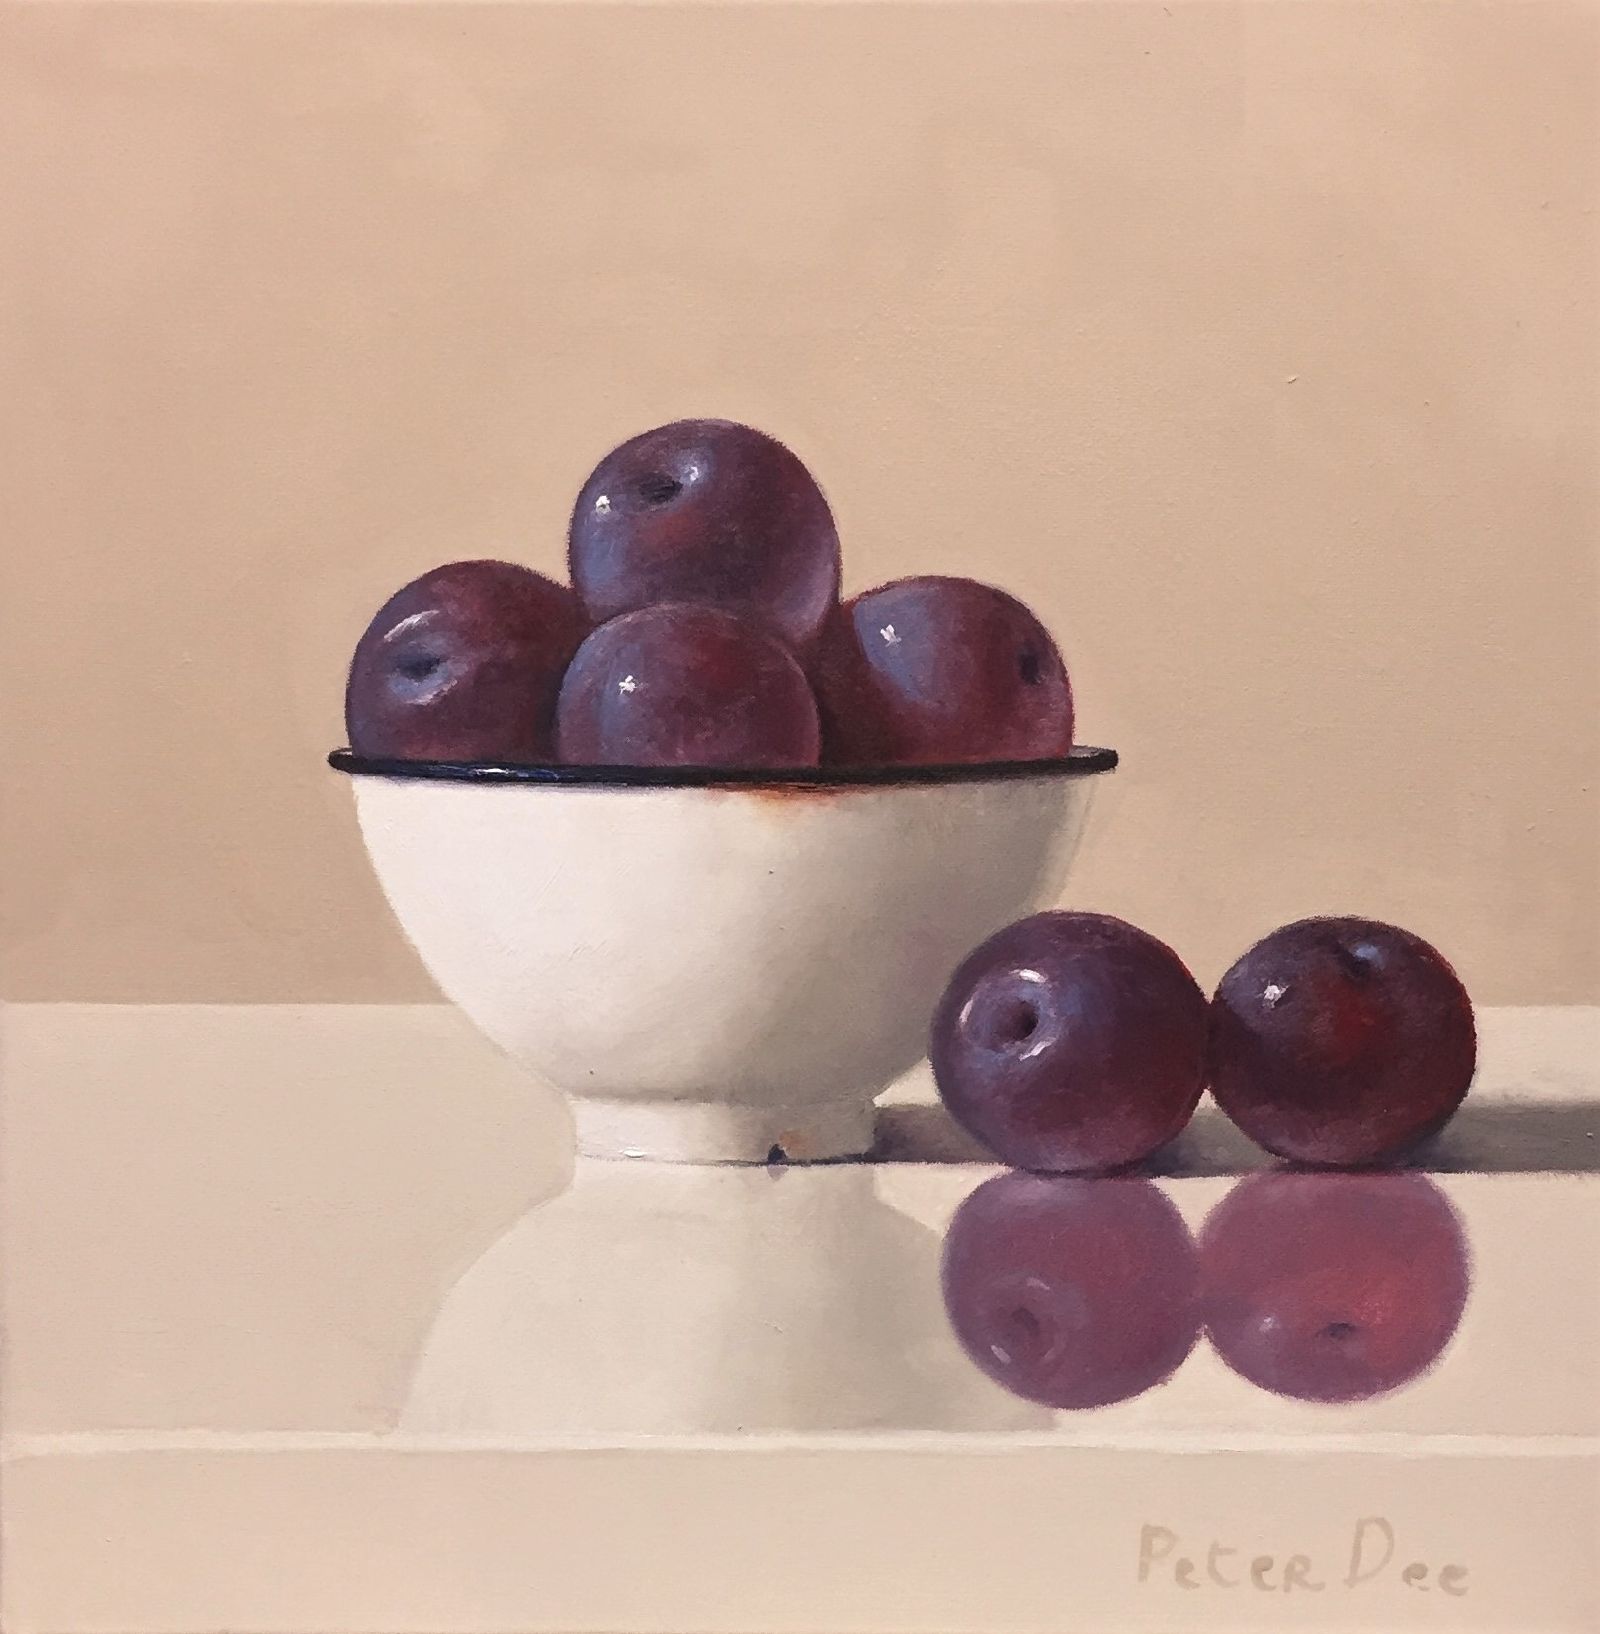 Bowl of Plums by Peter Dee